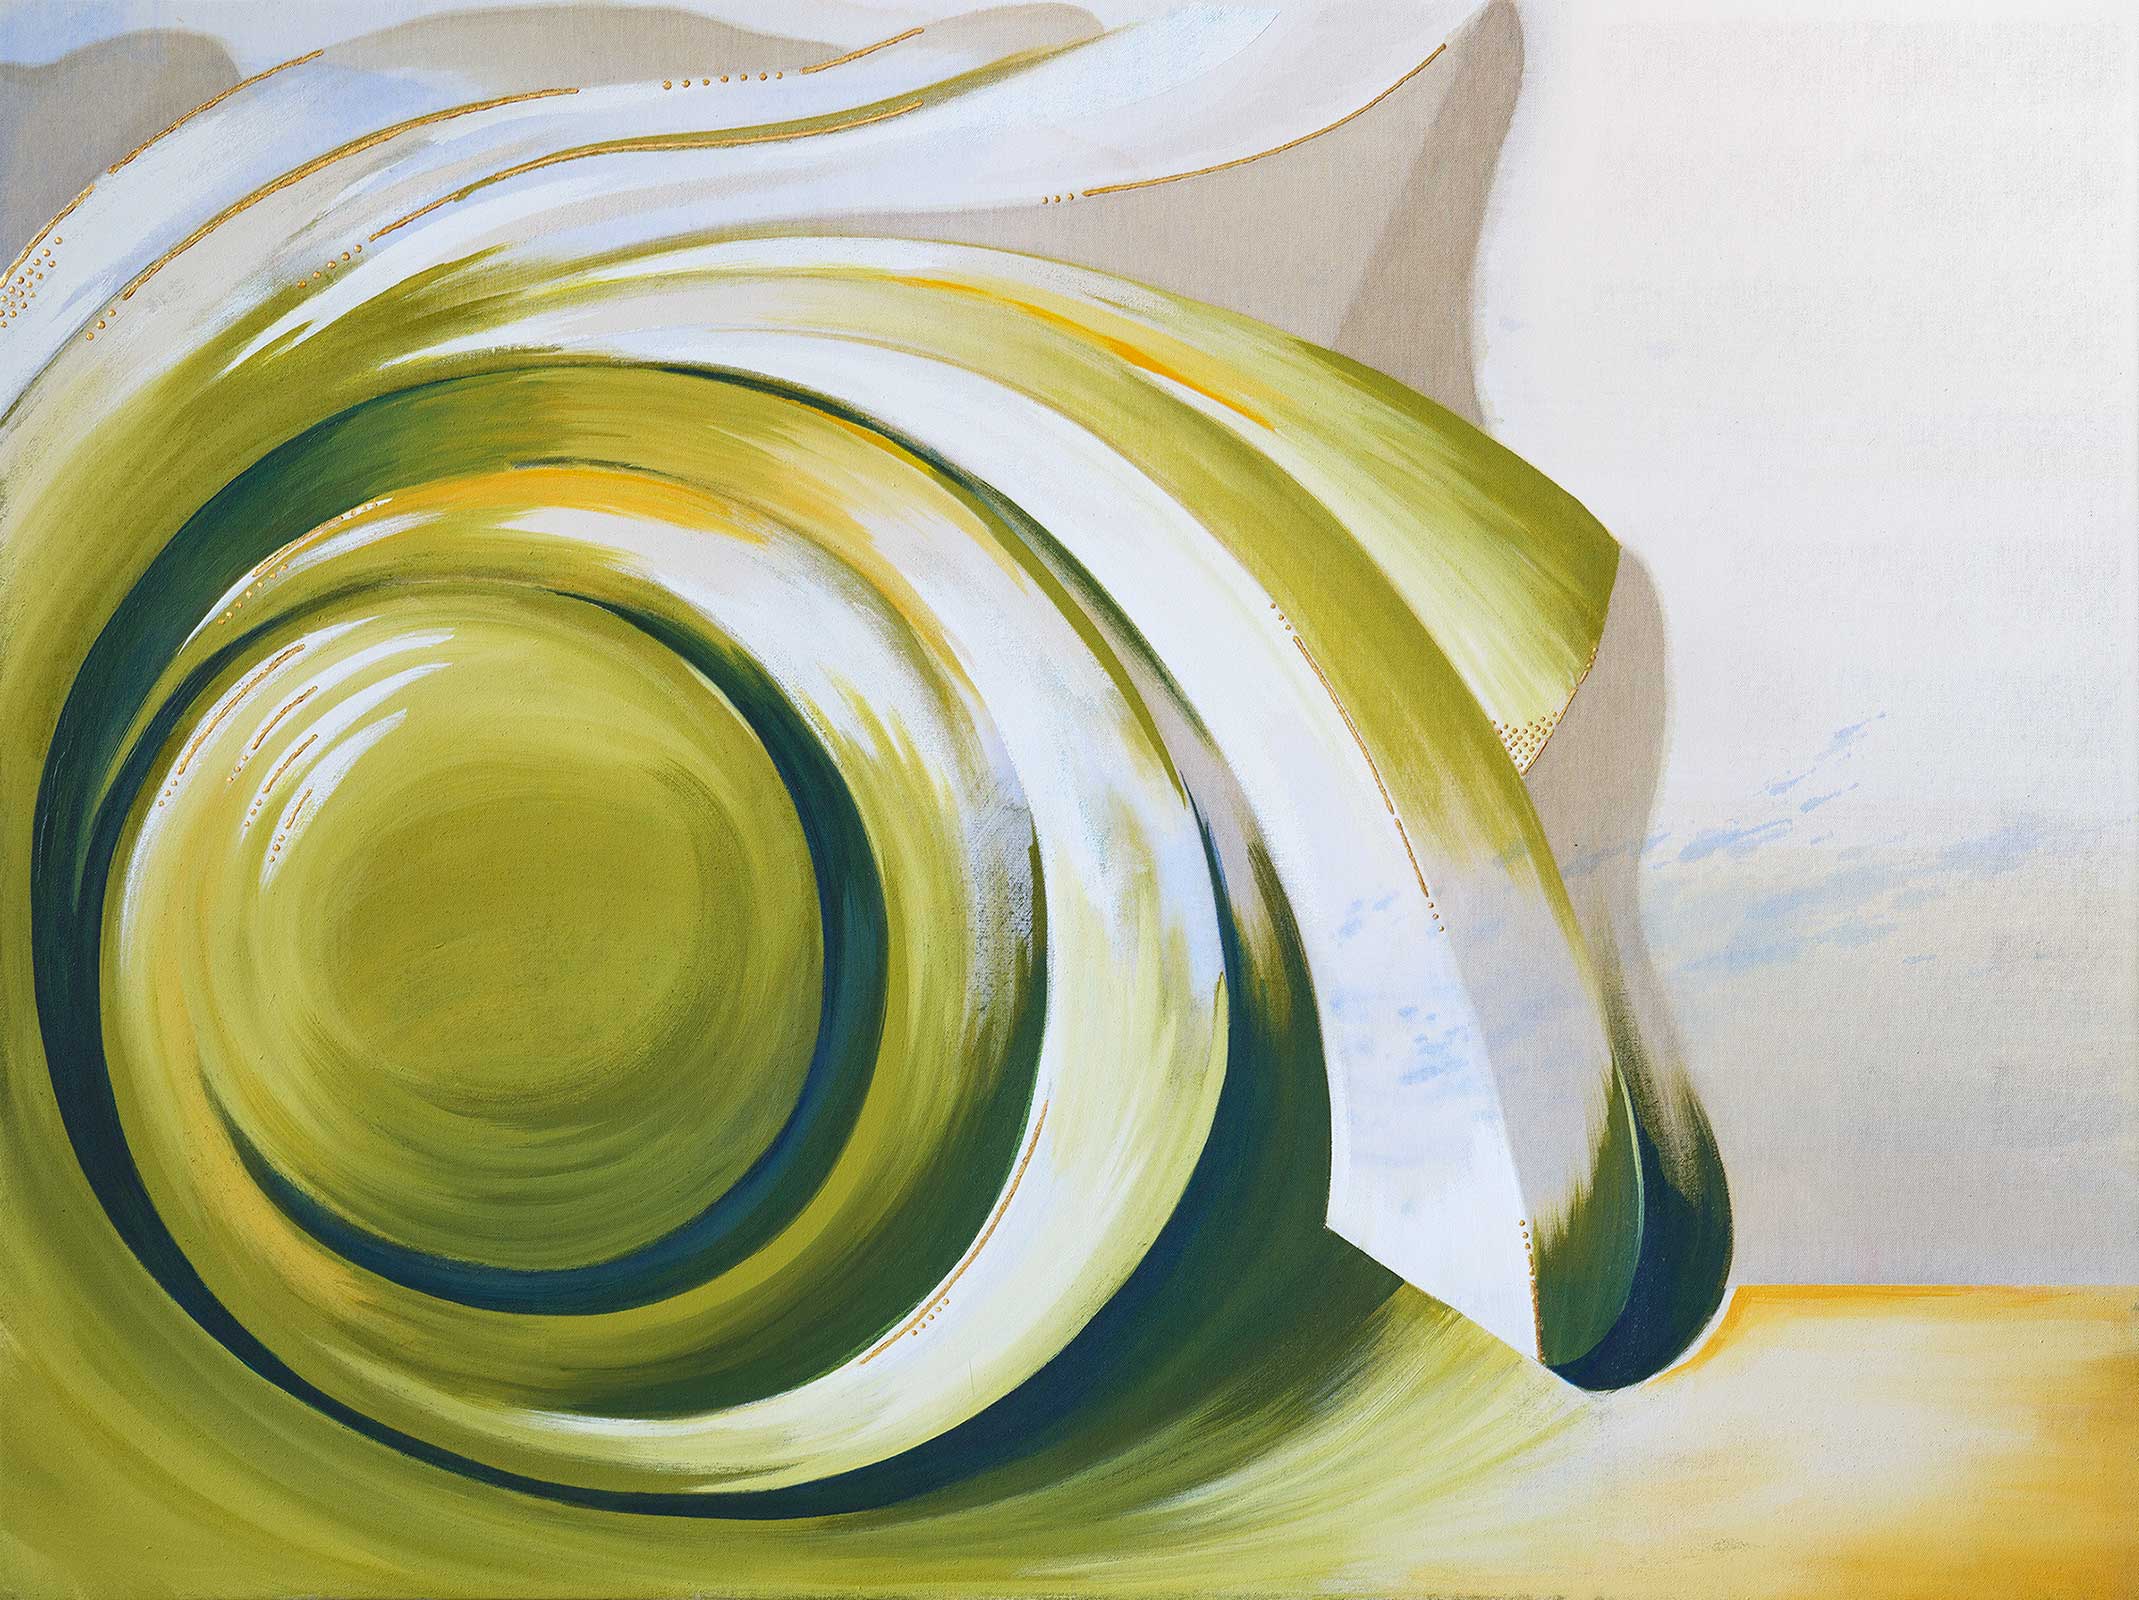 Furl No 2 - Architectural Detail painting in green, white, yellow acrylic and gold leaf, by Teale Hatheway